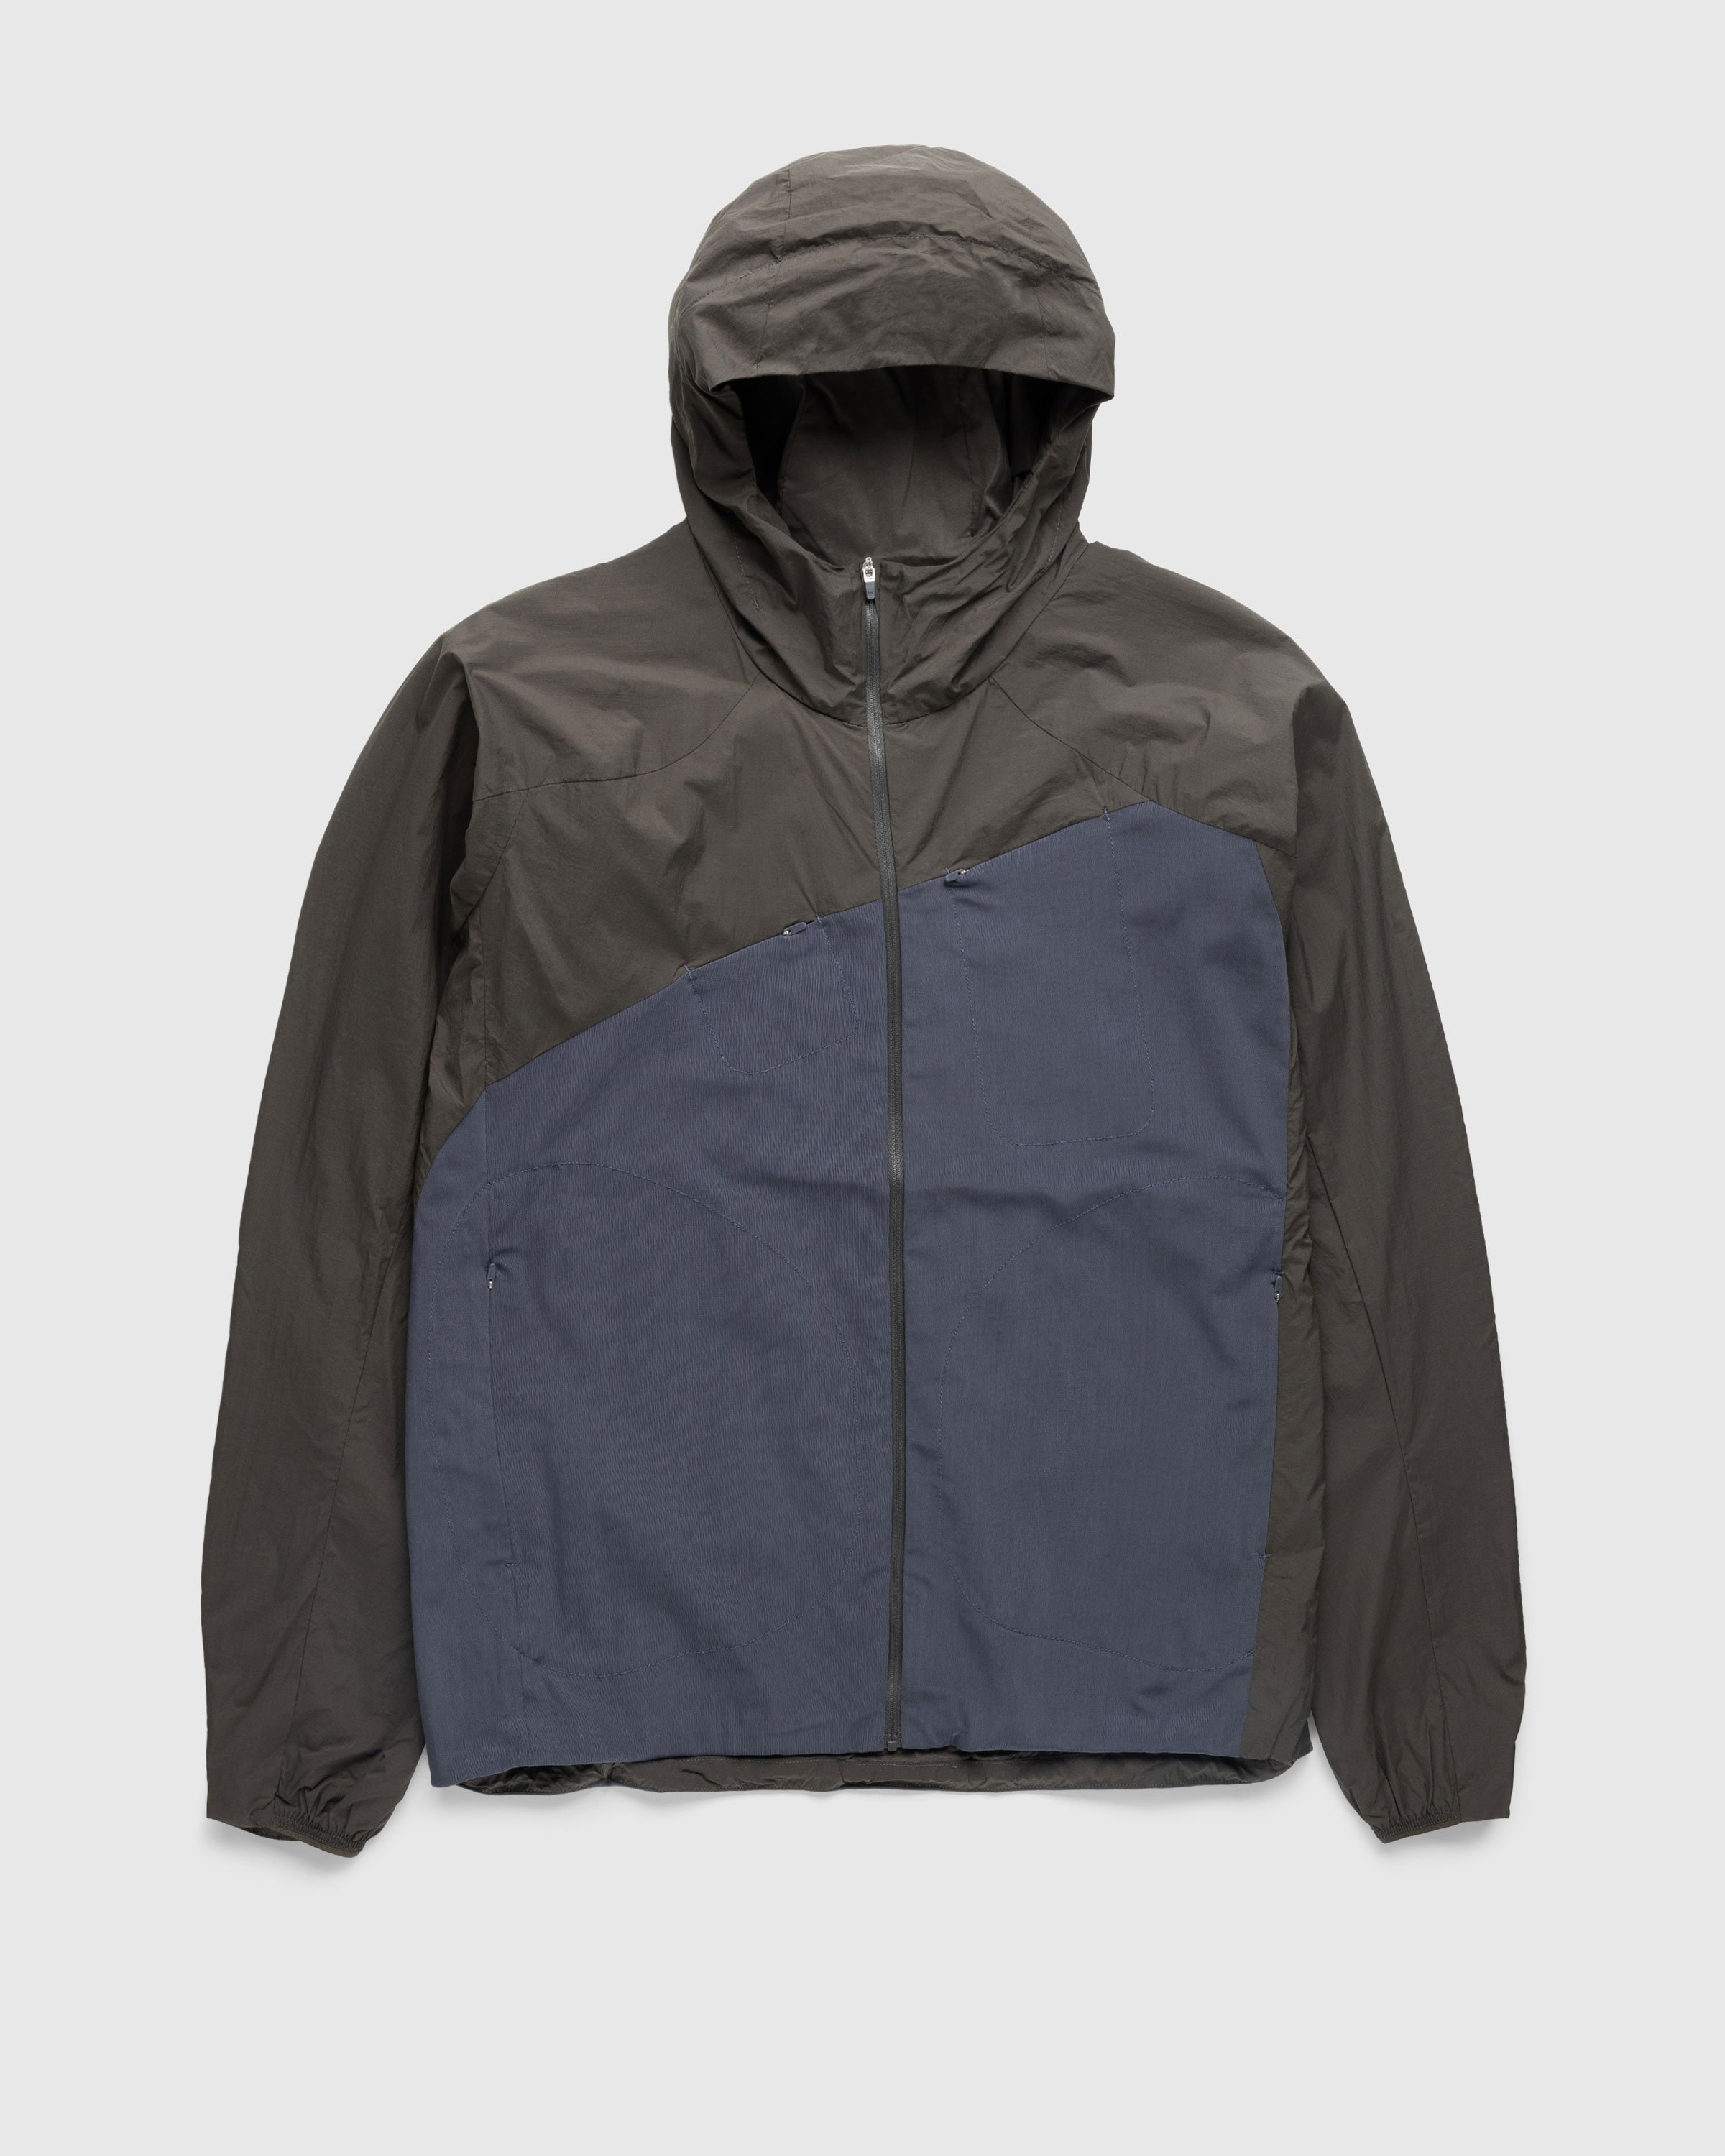 Post Archive Faction (PAF) – 5.1 Technical Jacket Center Brown